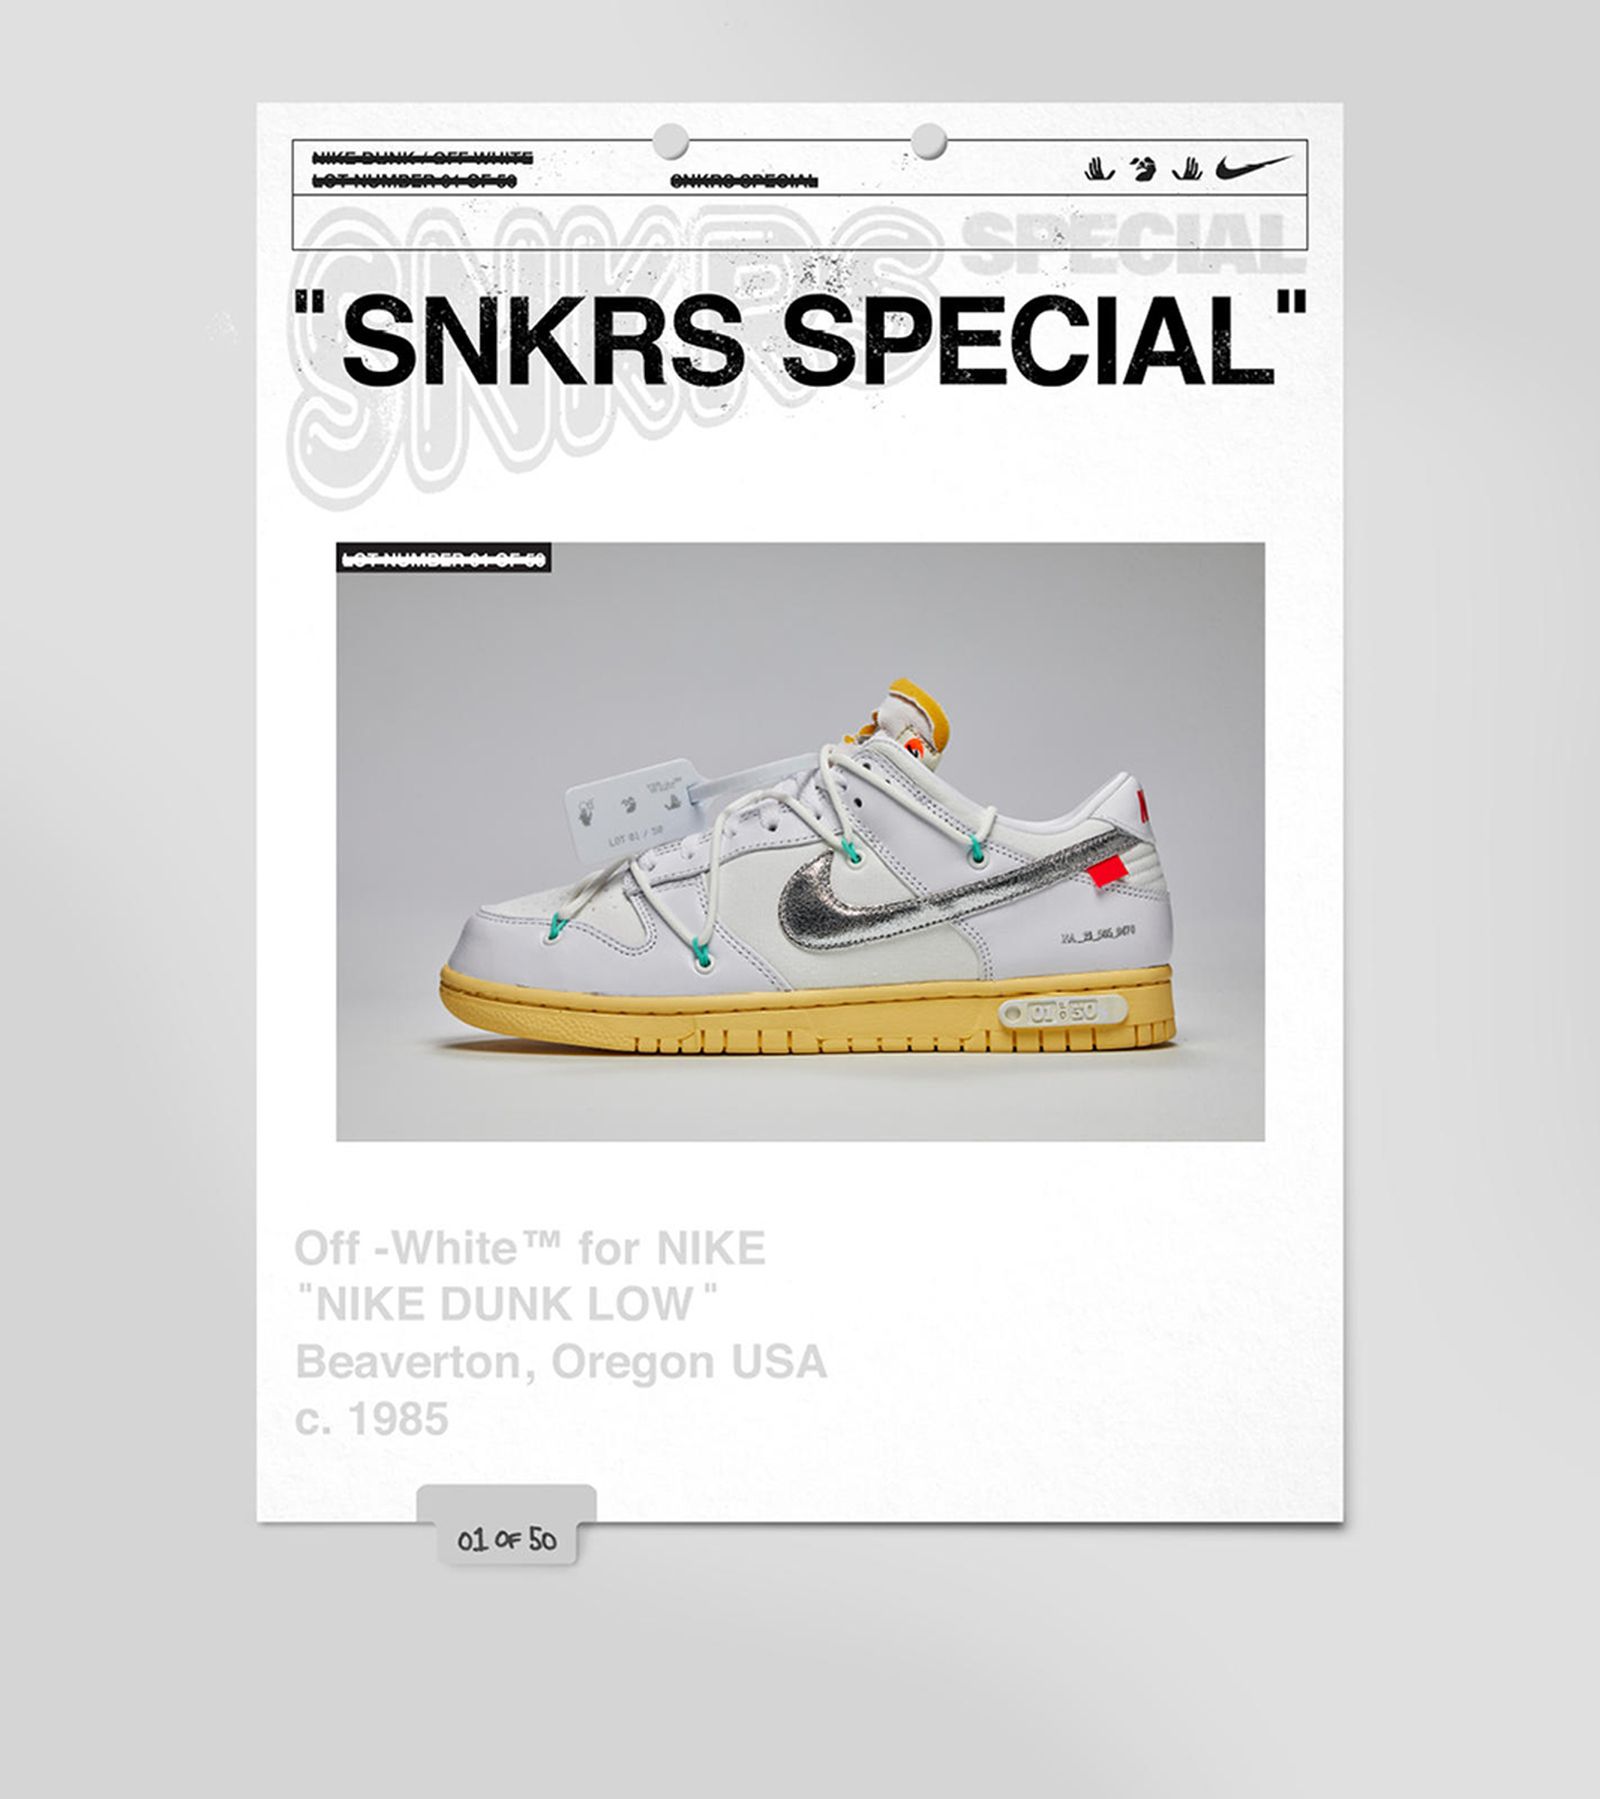 This Get That Nike SNKRS Exclusive Access